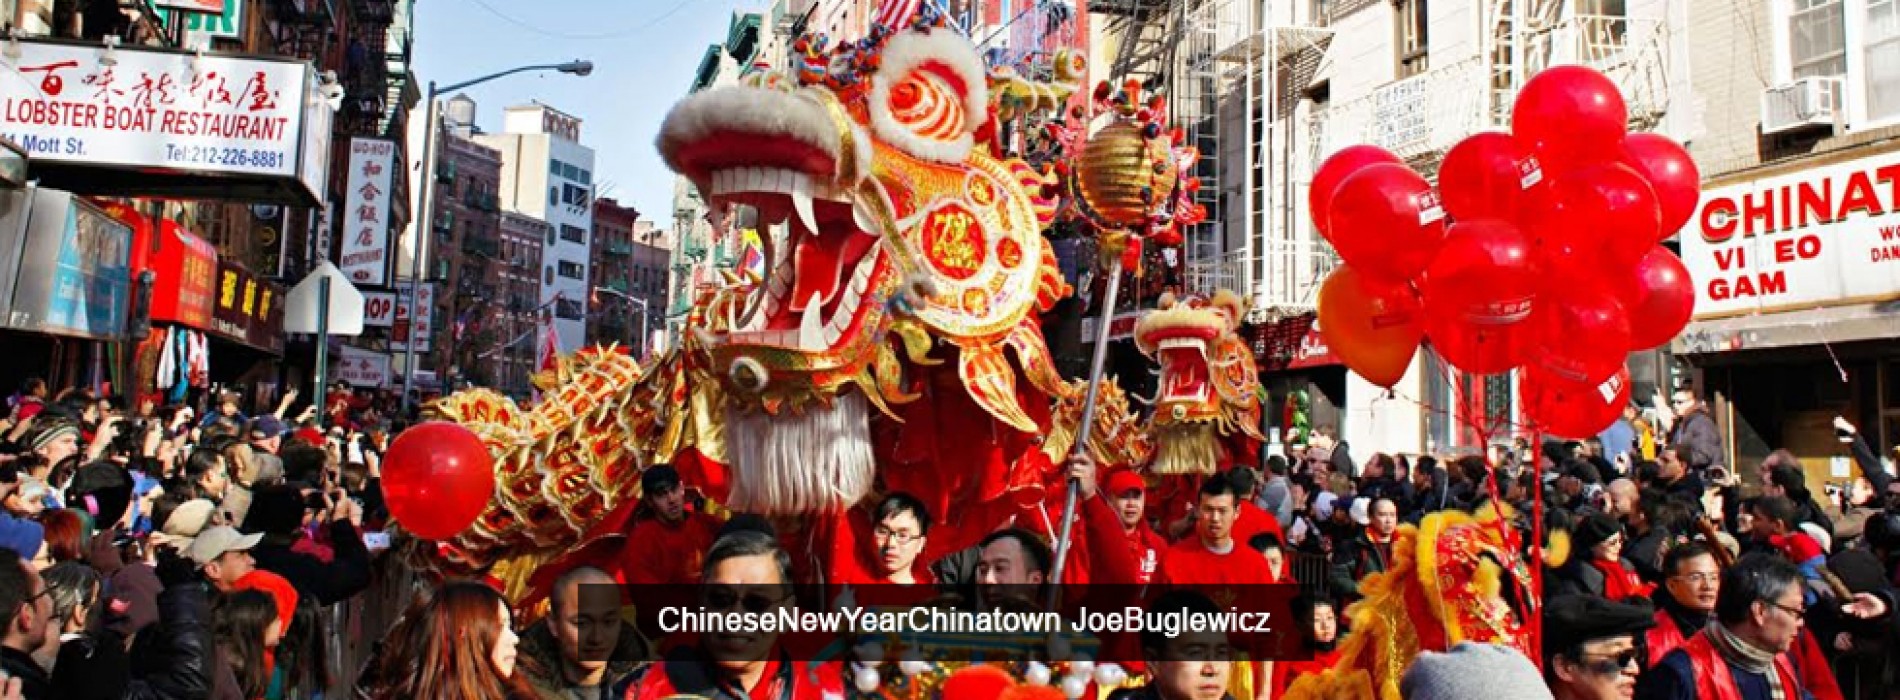 17 ways to discover New York City this Lunar New Year